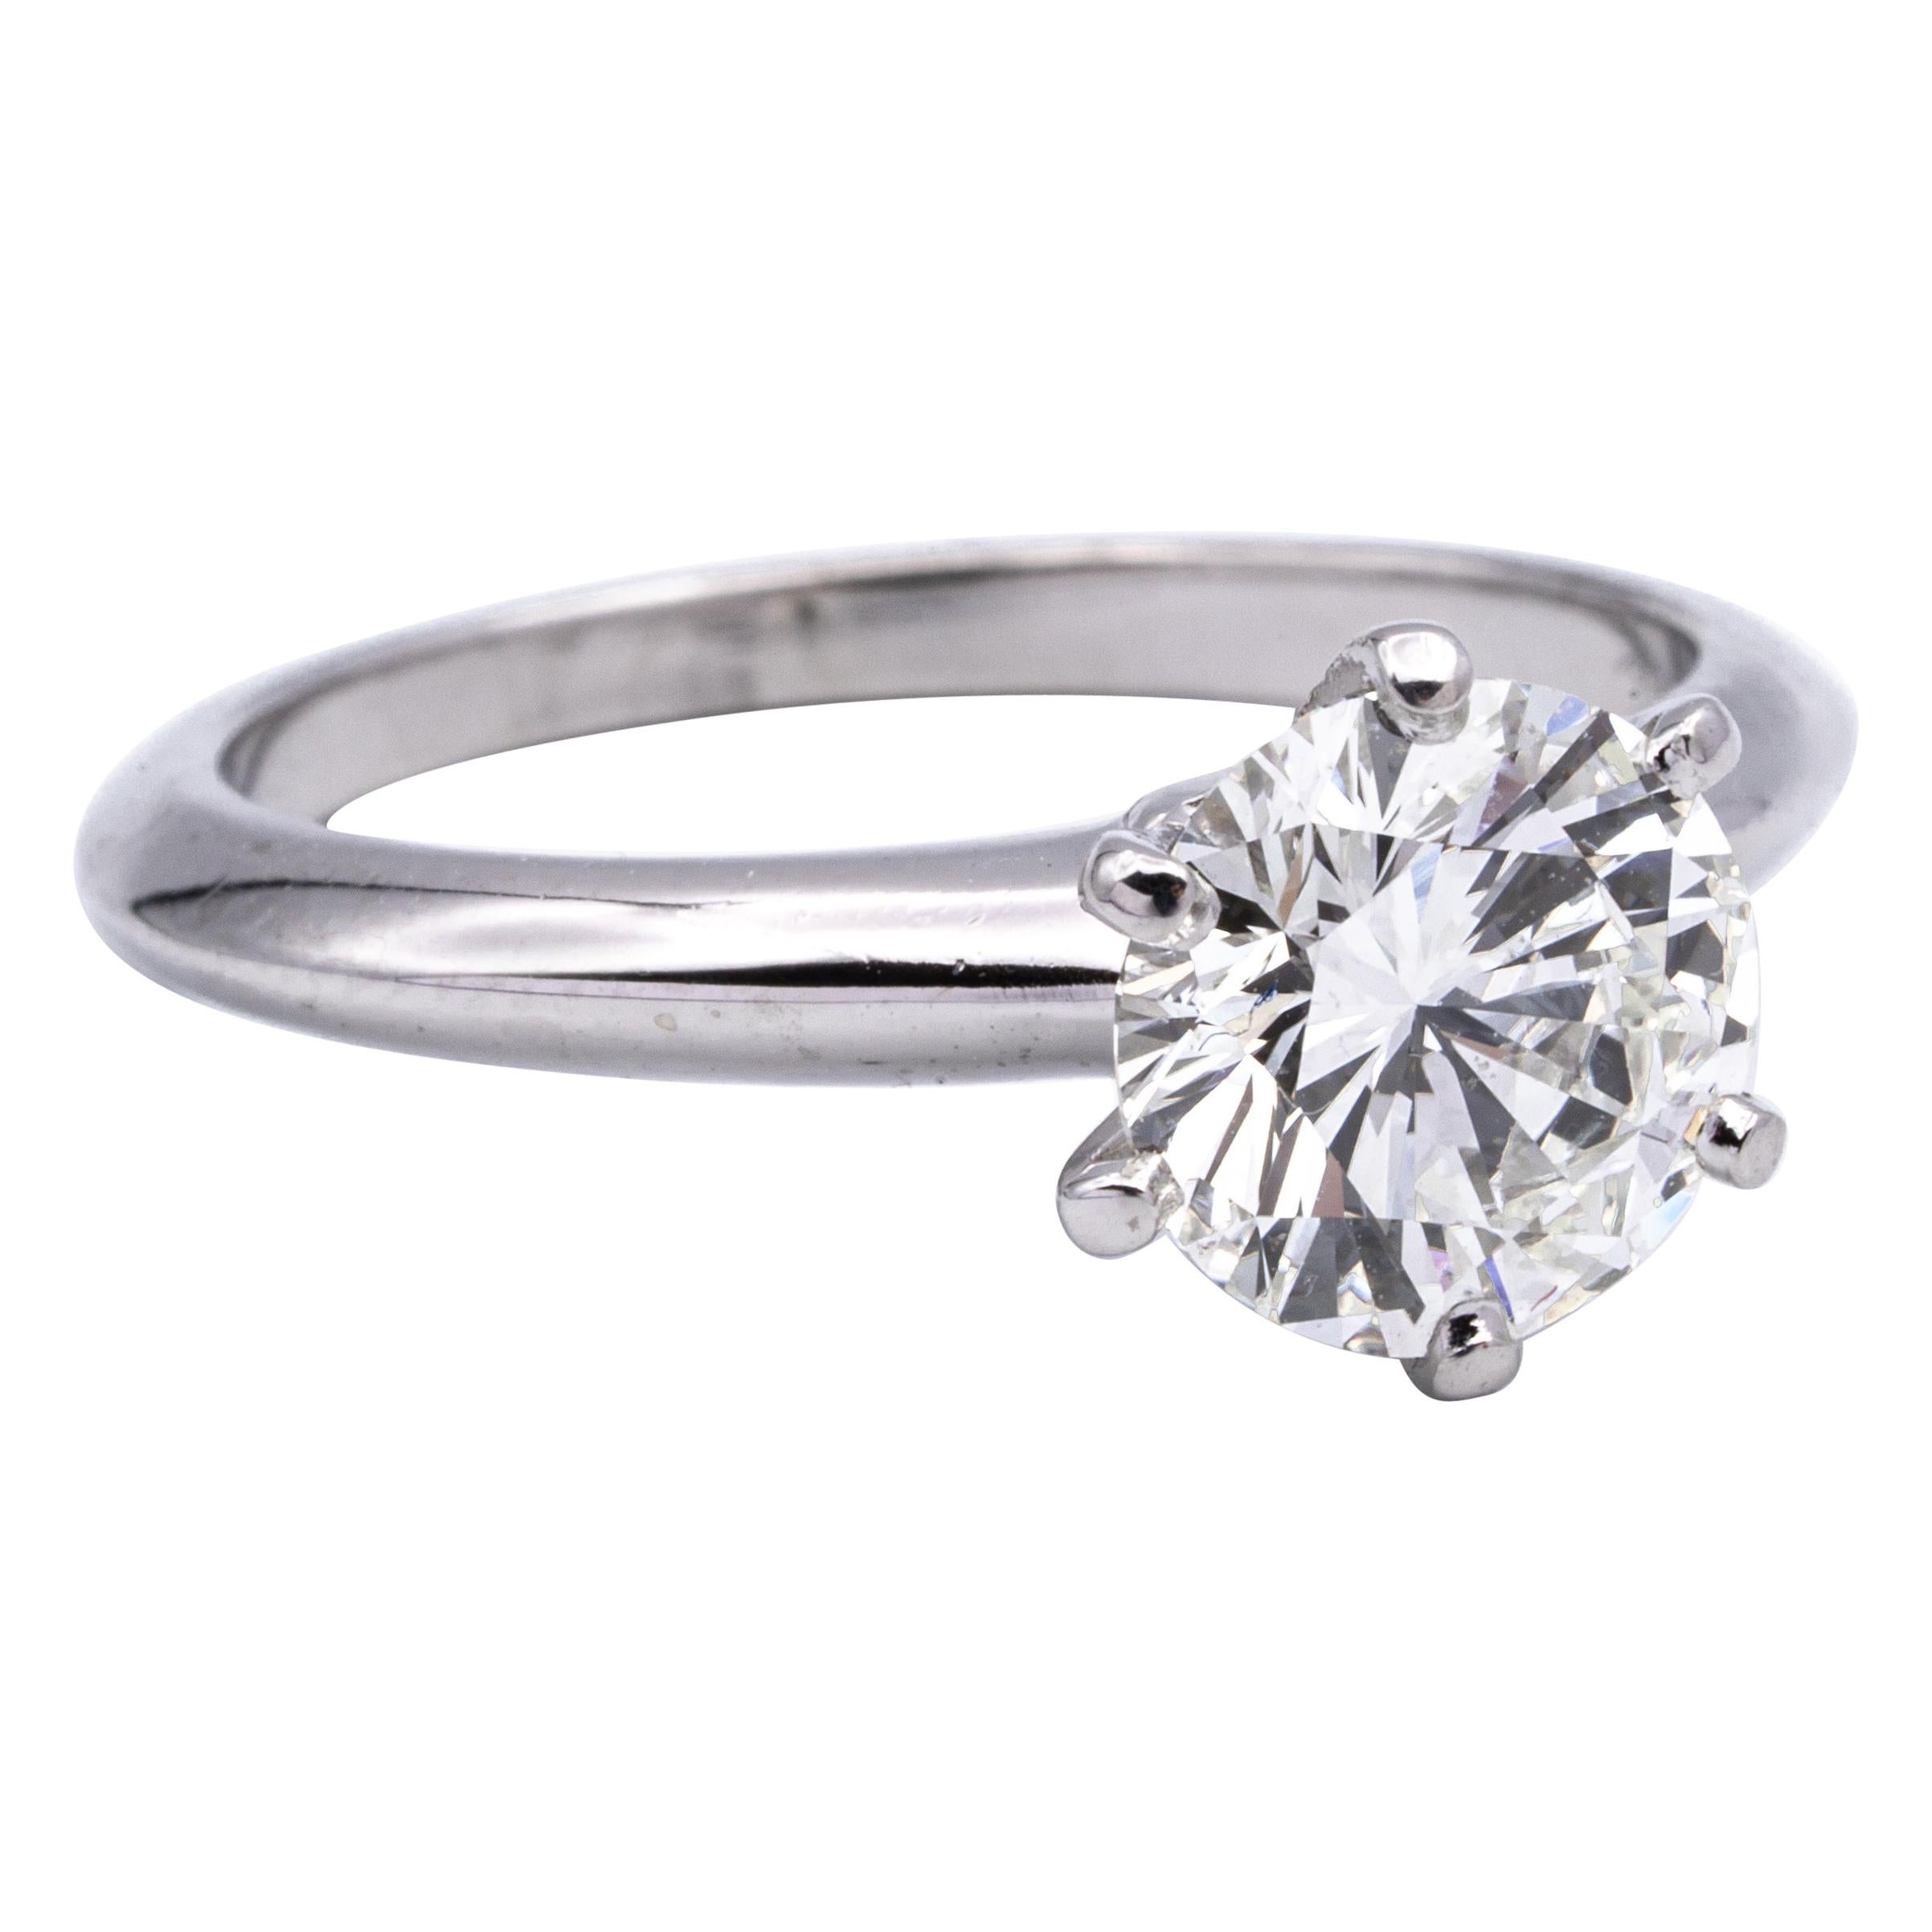 Tiffany & Co. "Classic" Engagement Ring with 1.54 Carat Round Center in Platinum